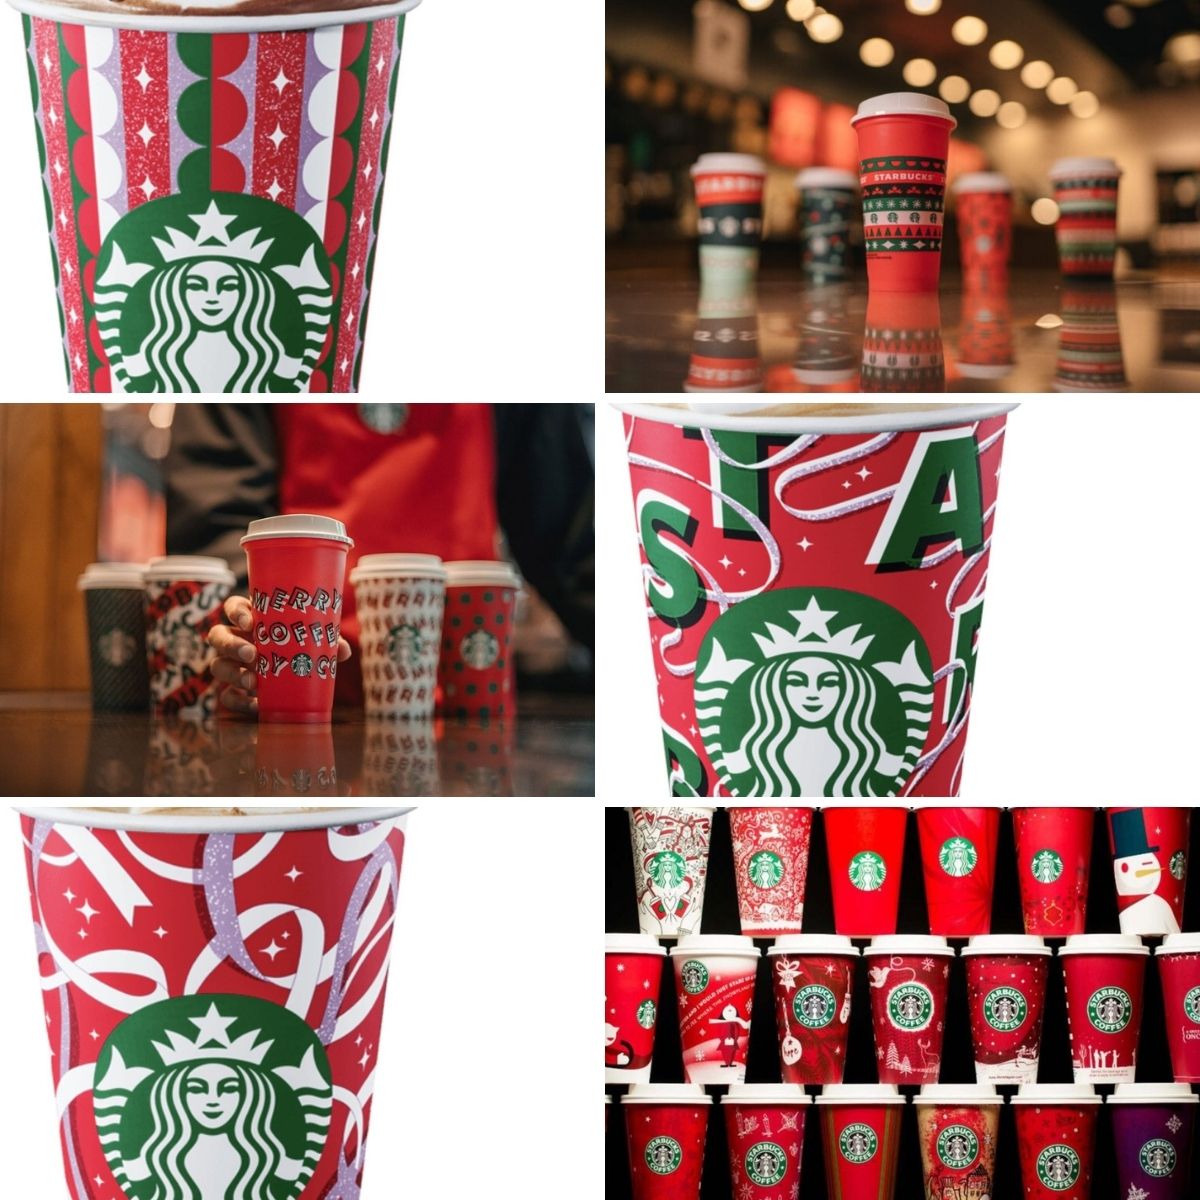 Collage photo featuring Starbucks holiday cups.